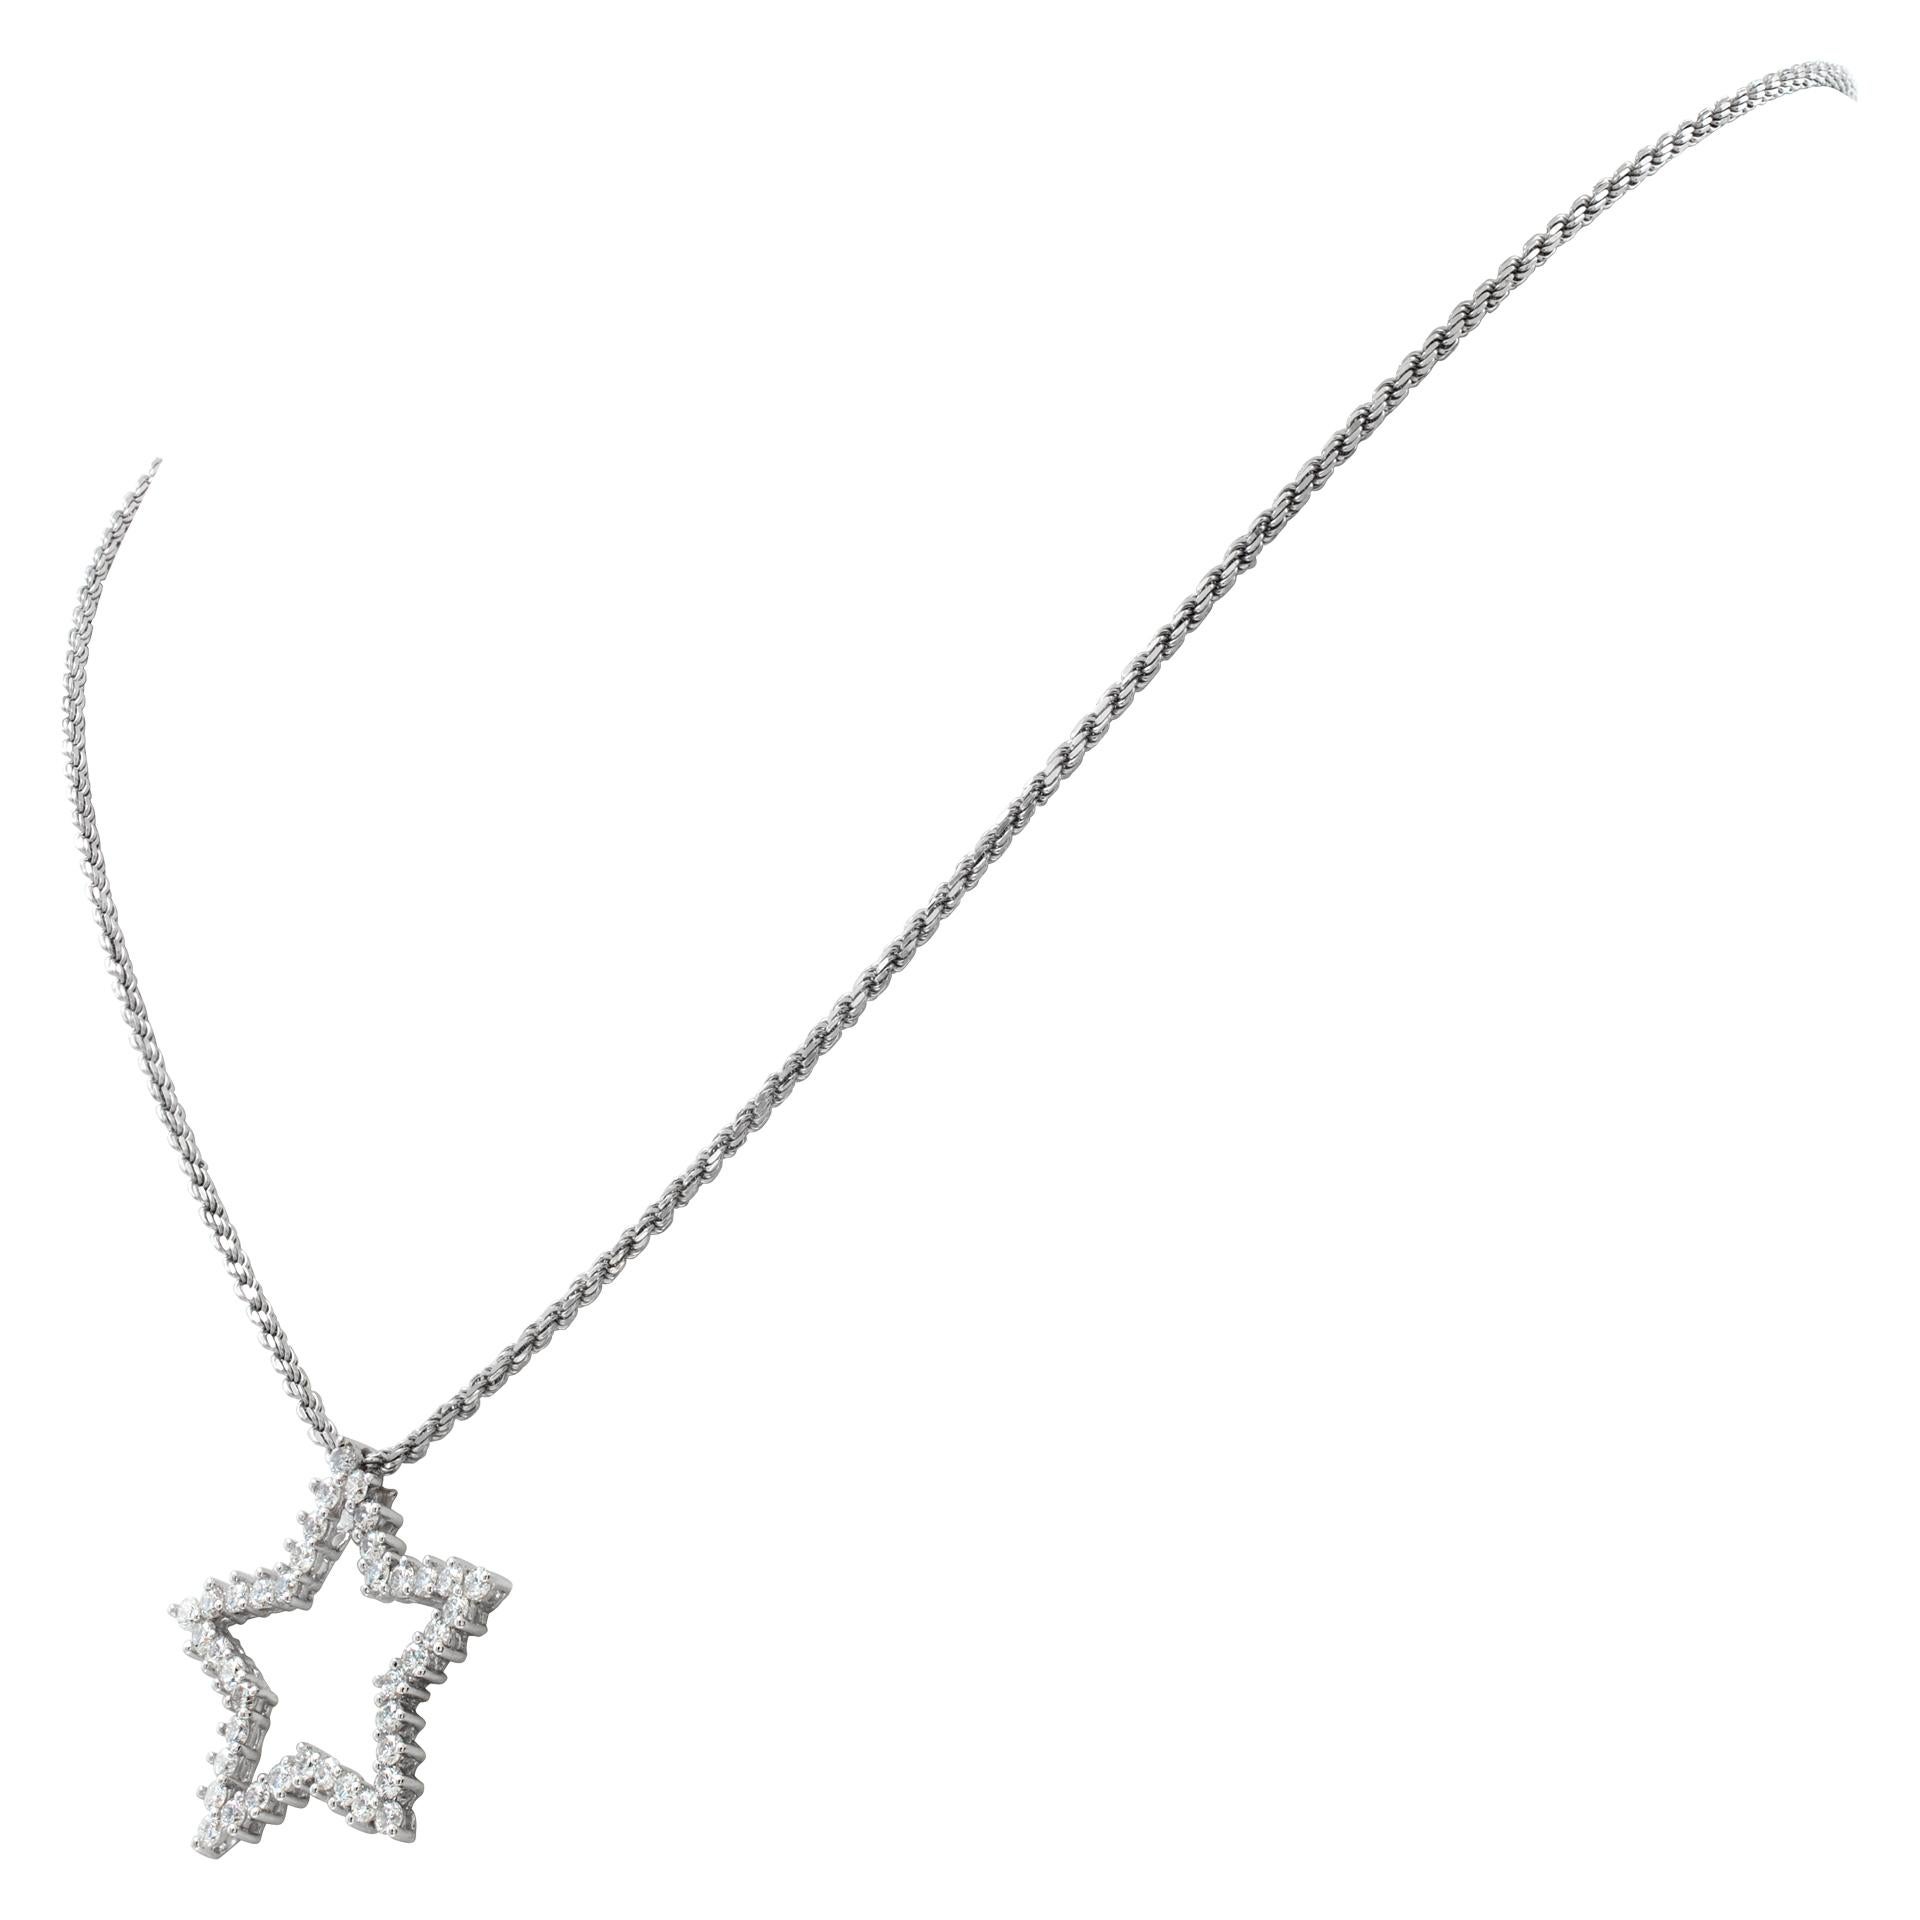 Diamond 18k white gold star pendant on 18k white gold chain In Excellent Condition For Sale In Surfside, FL